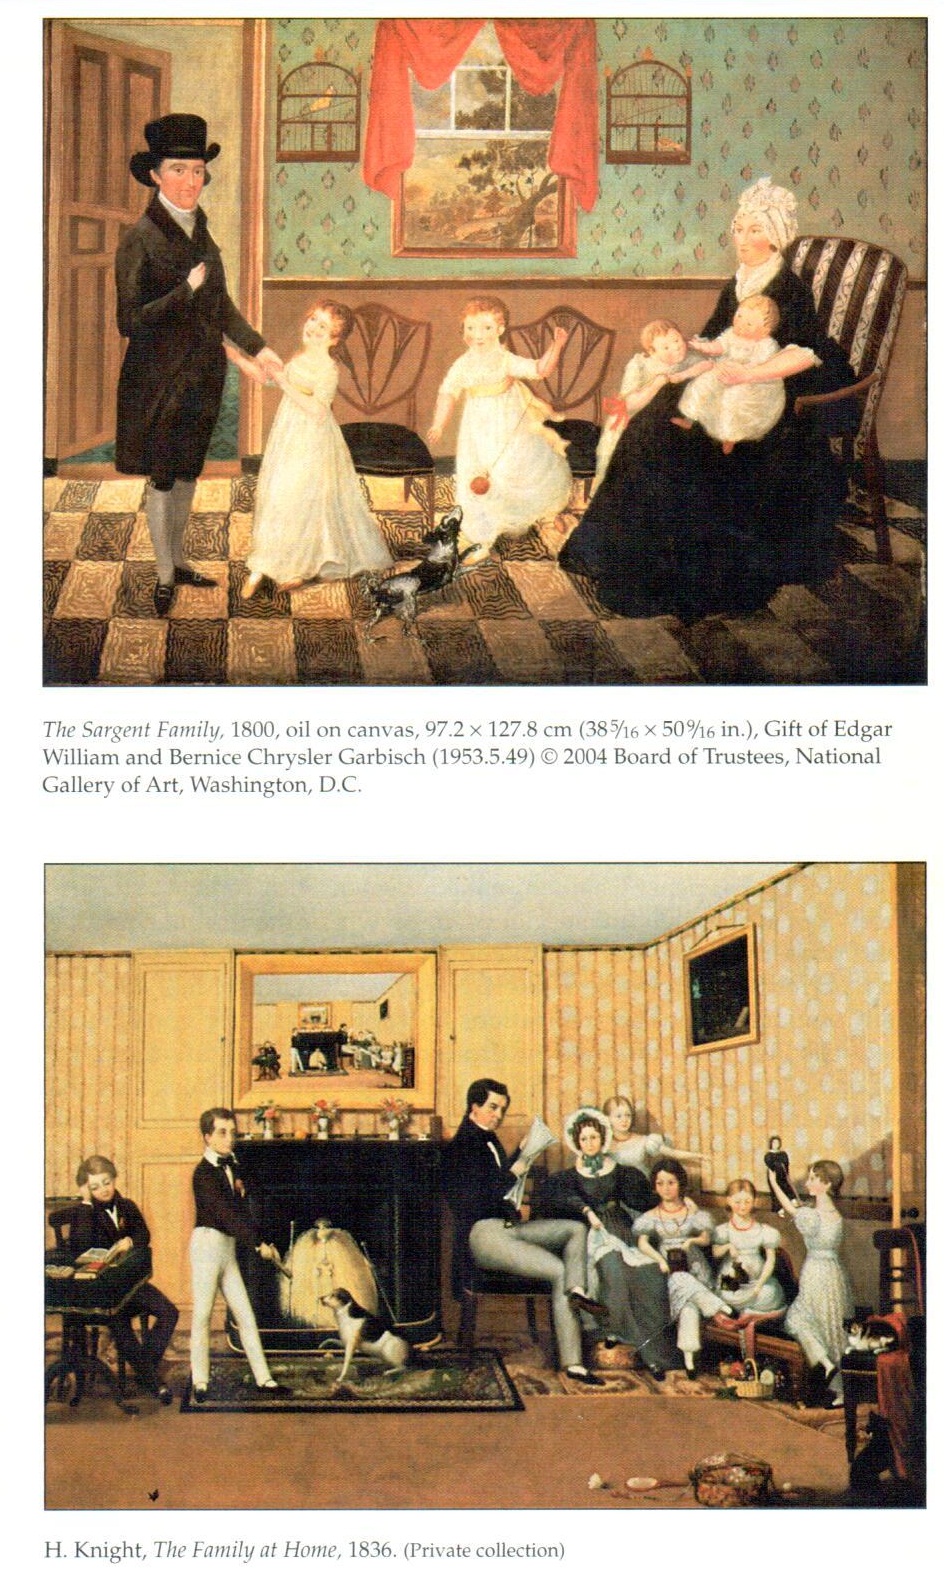 1116_The Sargent family painting.jpg